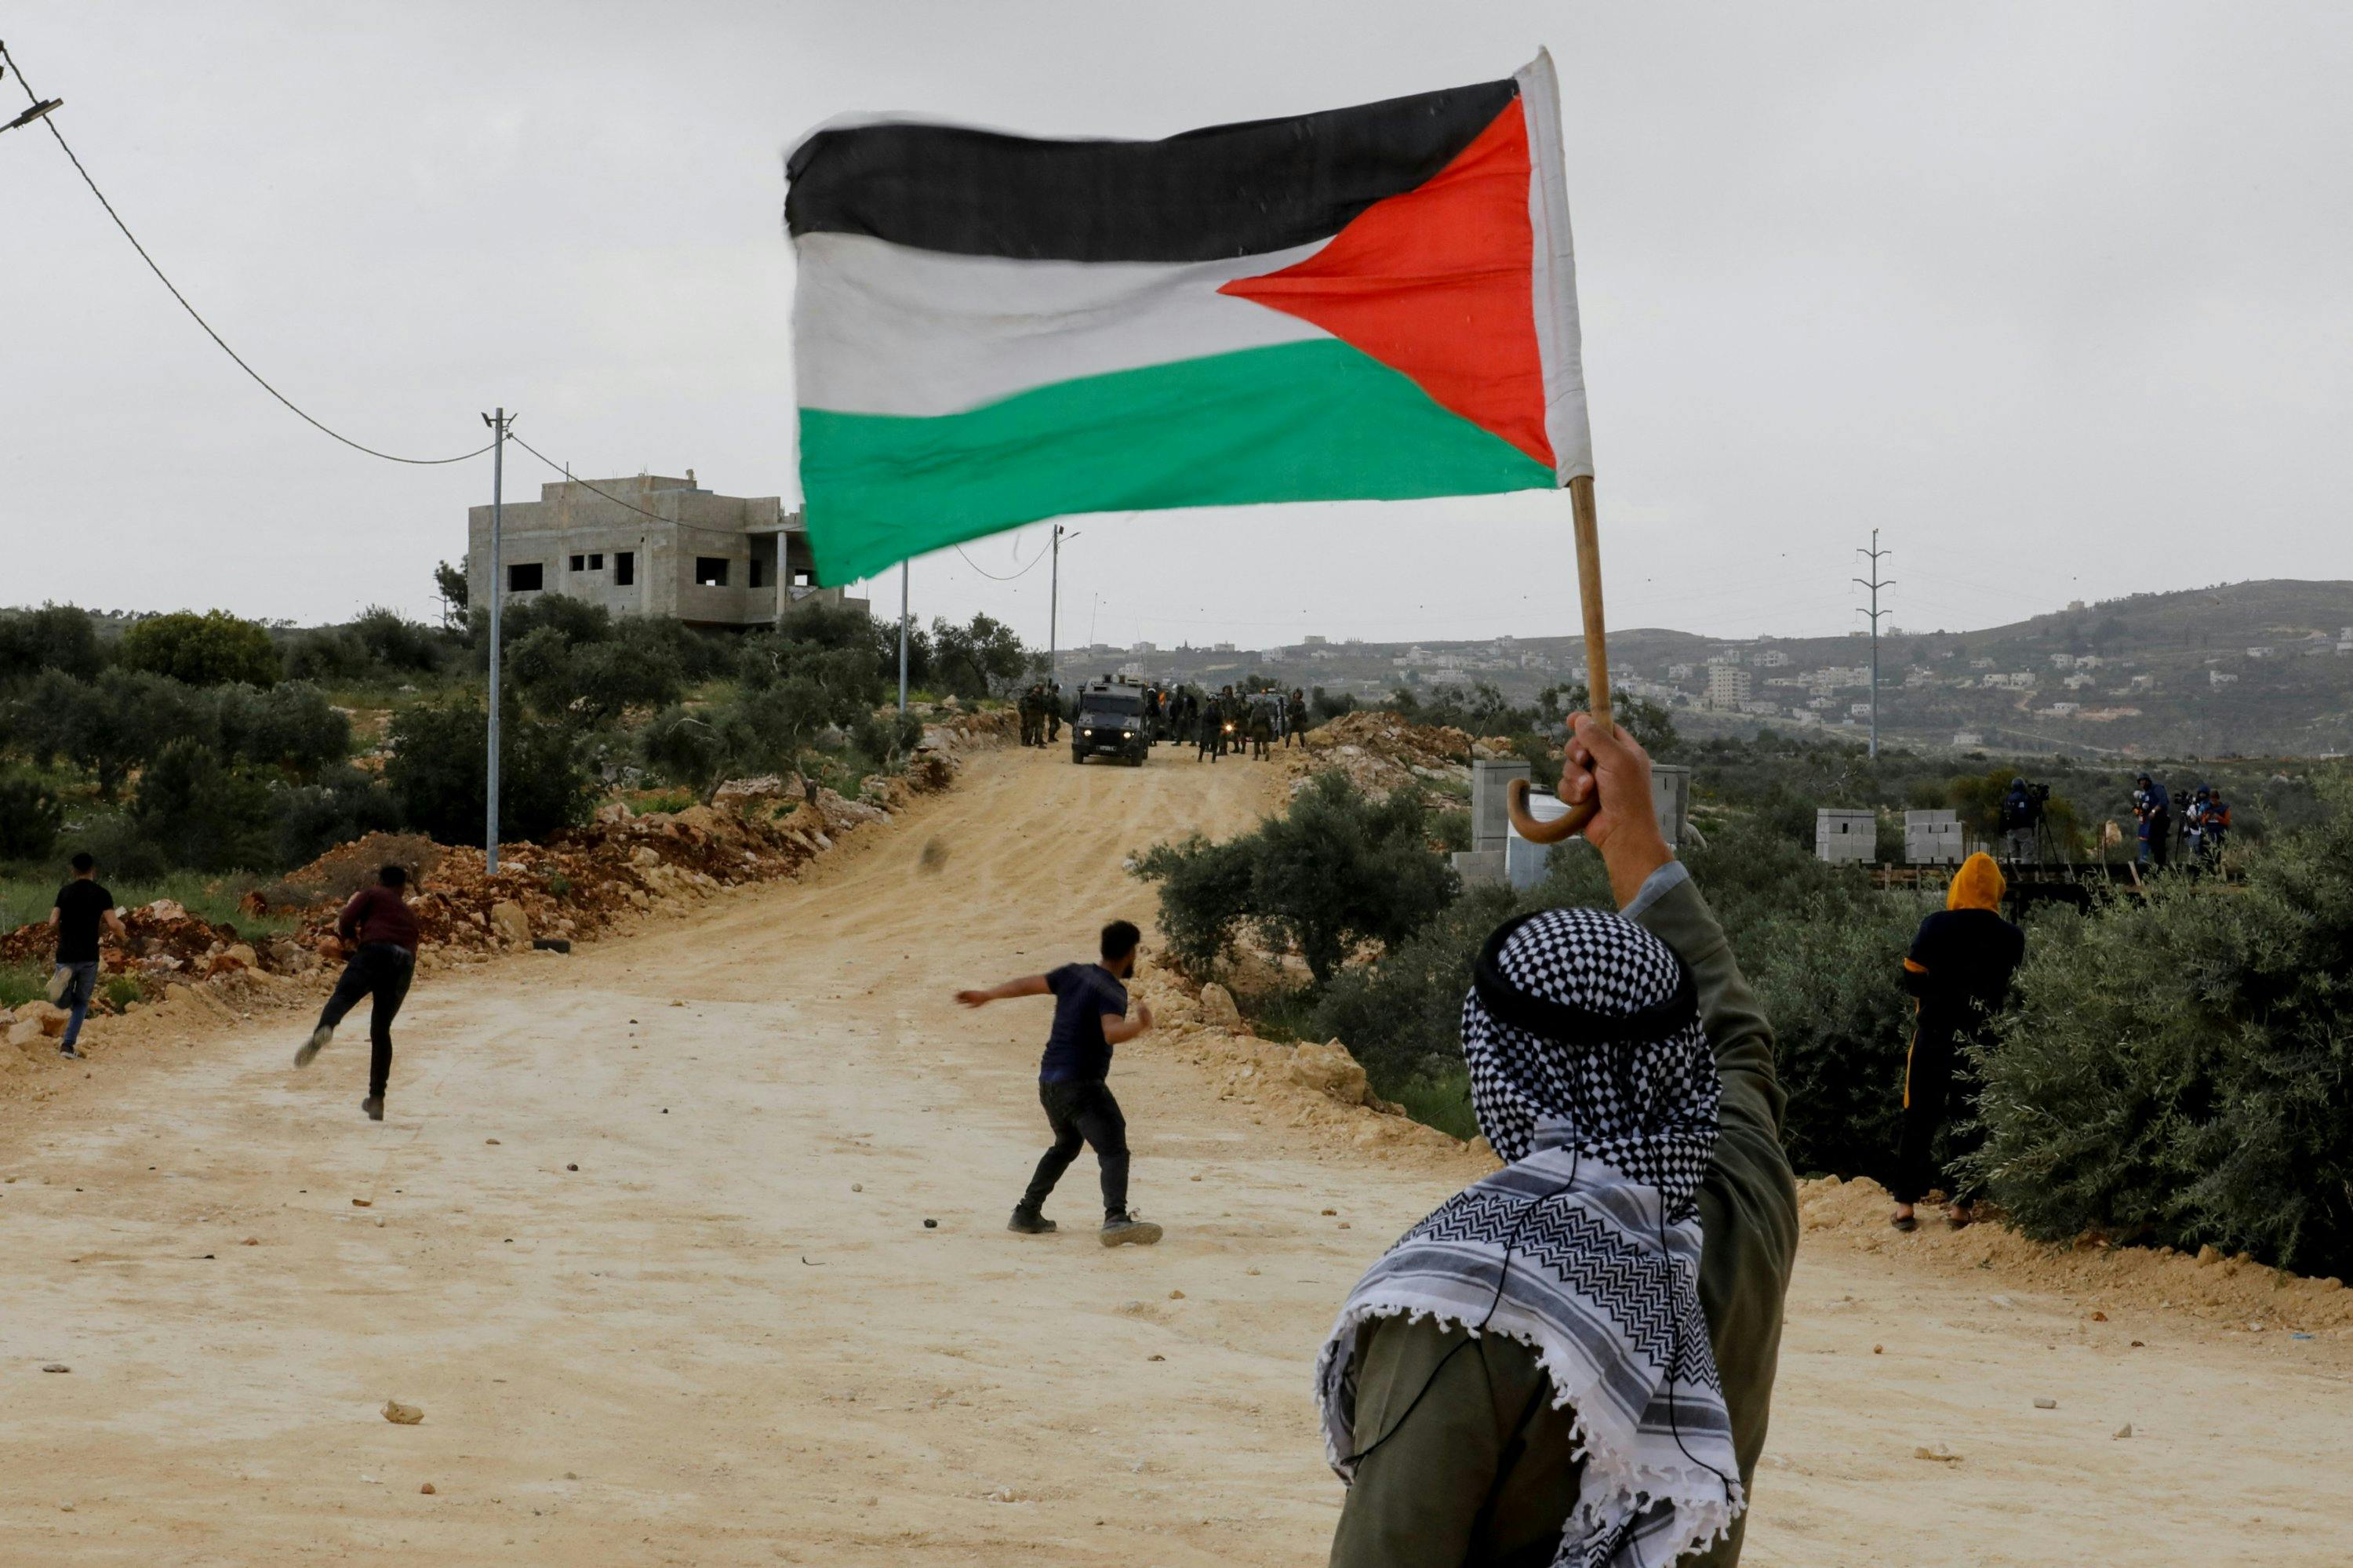 Oppression and resistance in Palestine today 